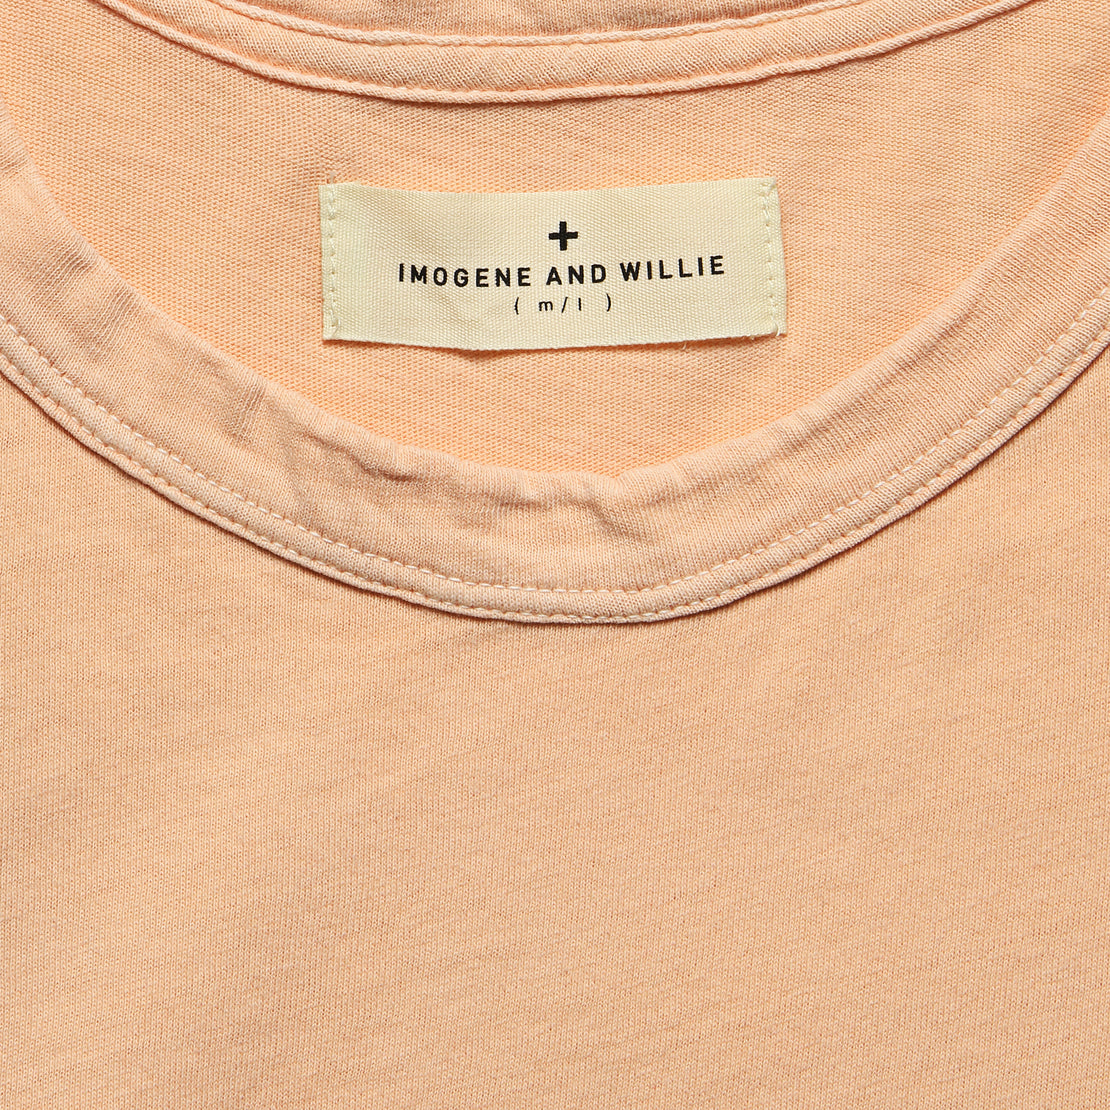 Drop Tee -  Blush - Imogene + Willie - STAG Provisions - W - Tops - S/S Tee